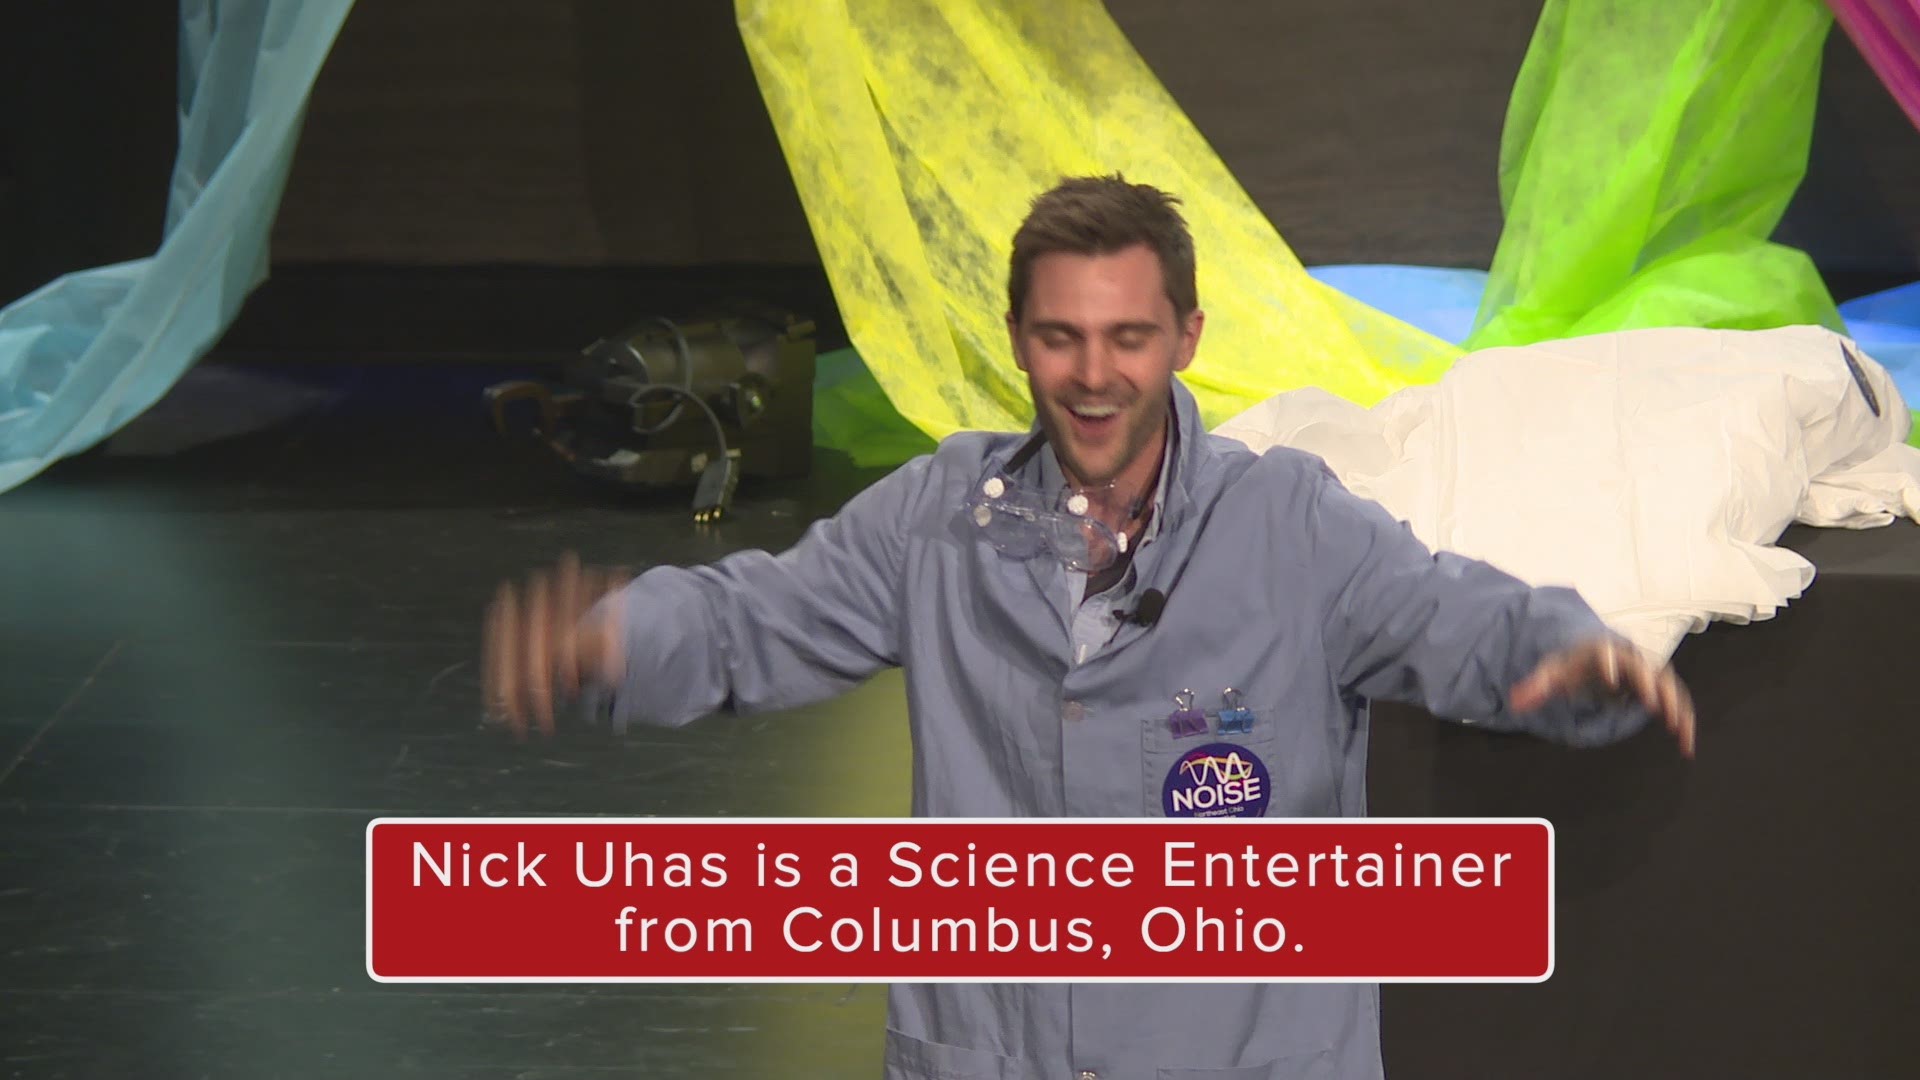 Nick Uhas brought his act to Northeast Ohio as part of the Northeast Ohio Innovation STEM Expo.